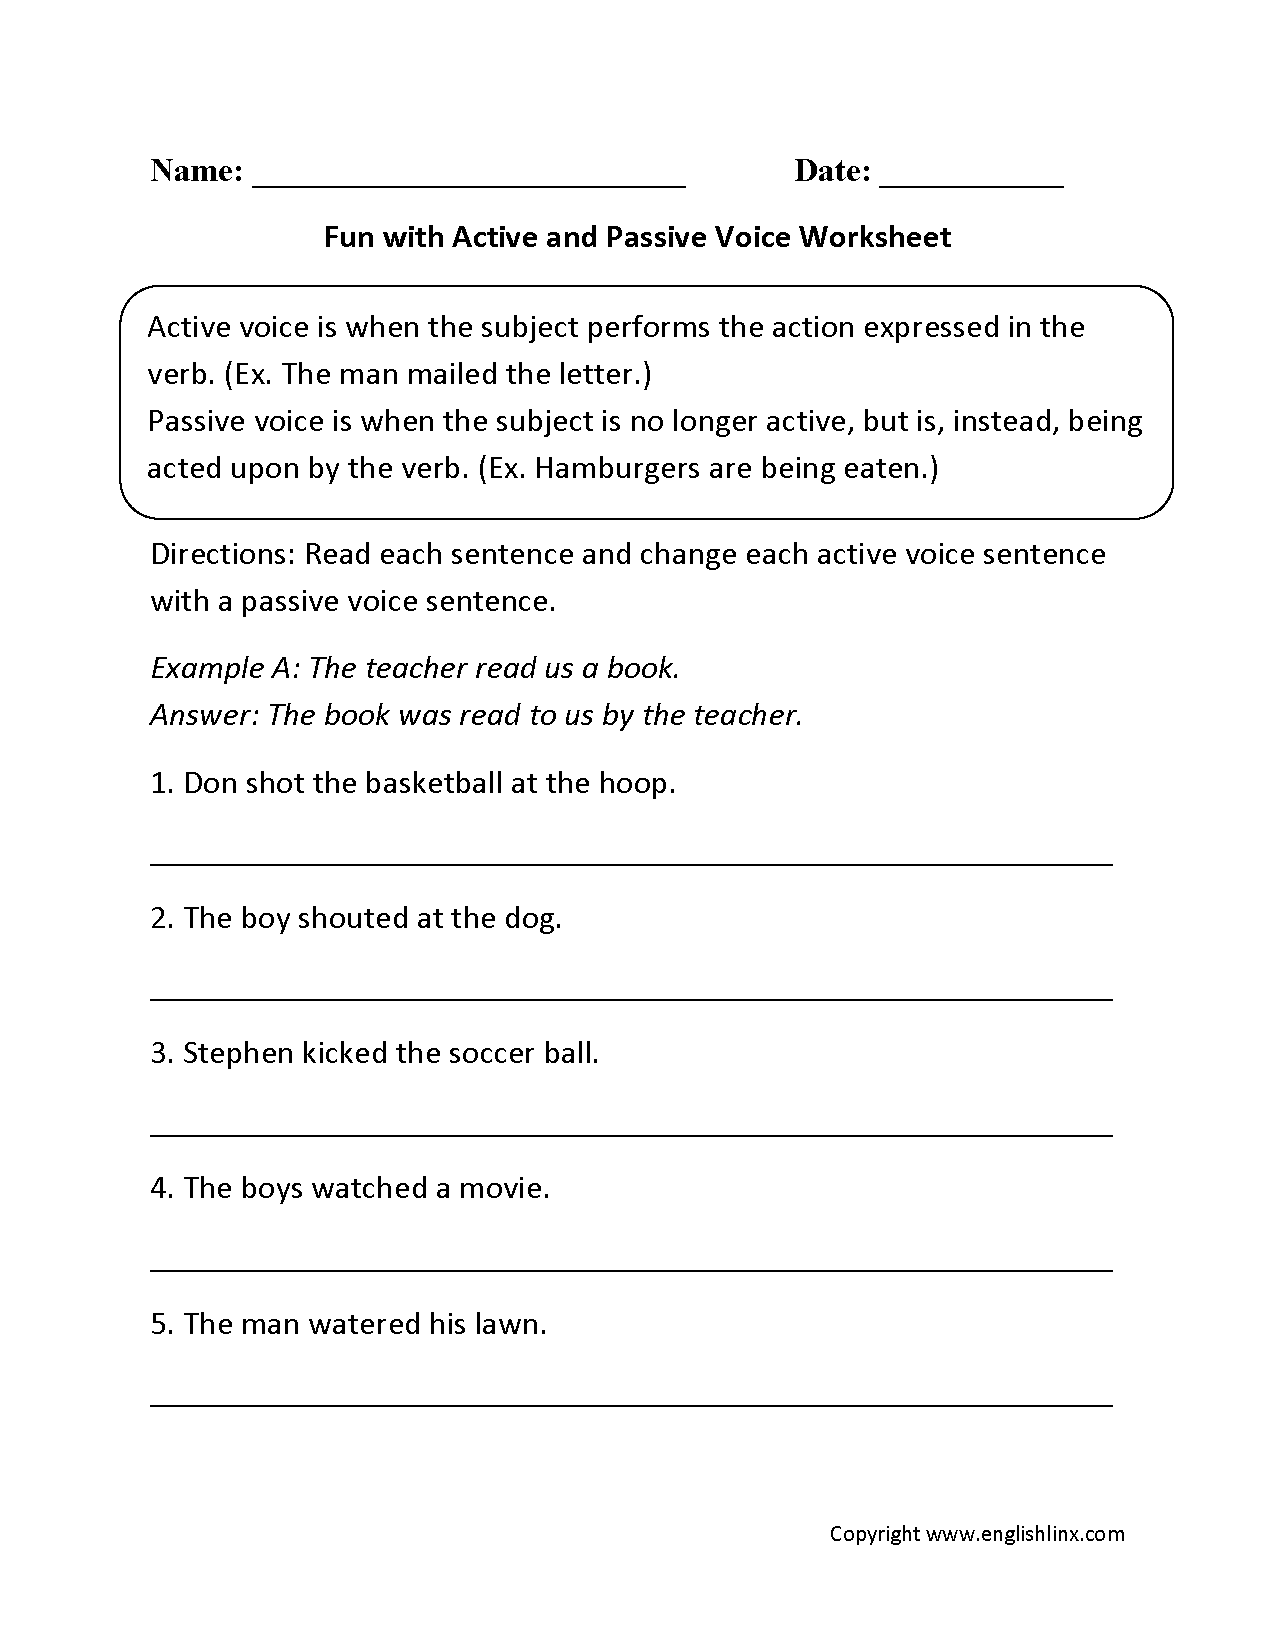 Fun with Active and Passive Voice Worksheets